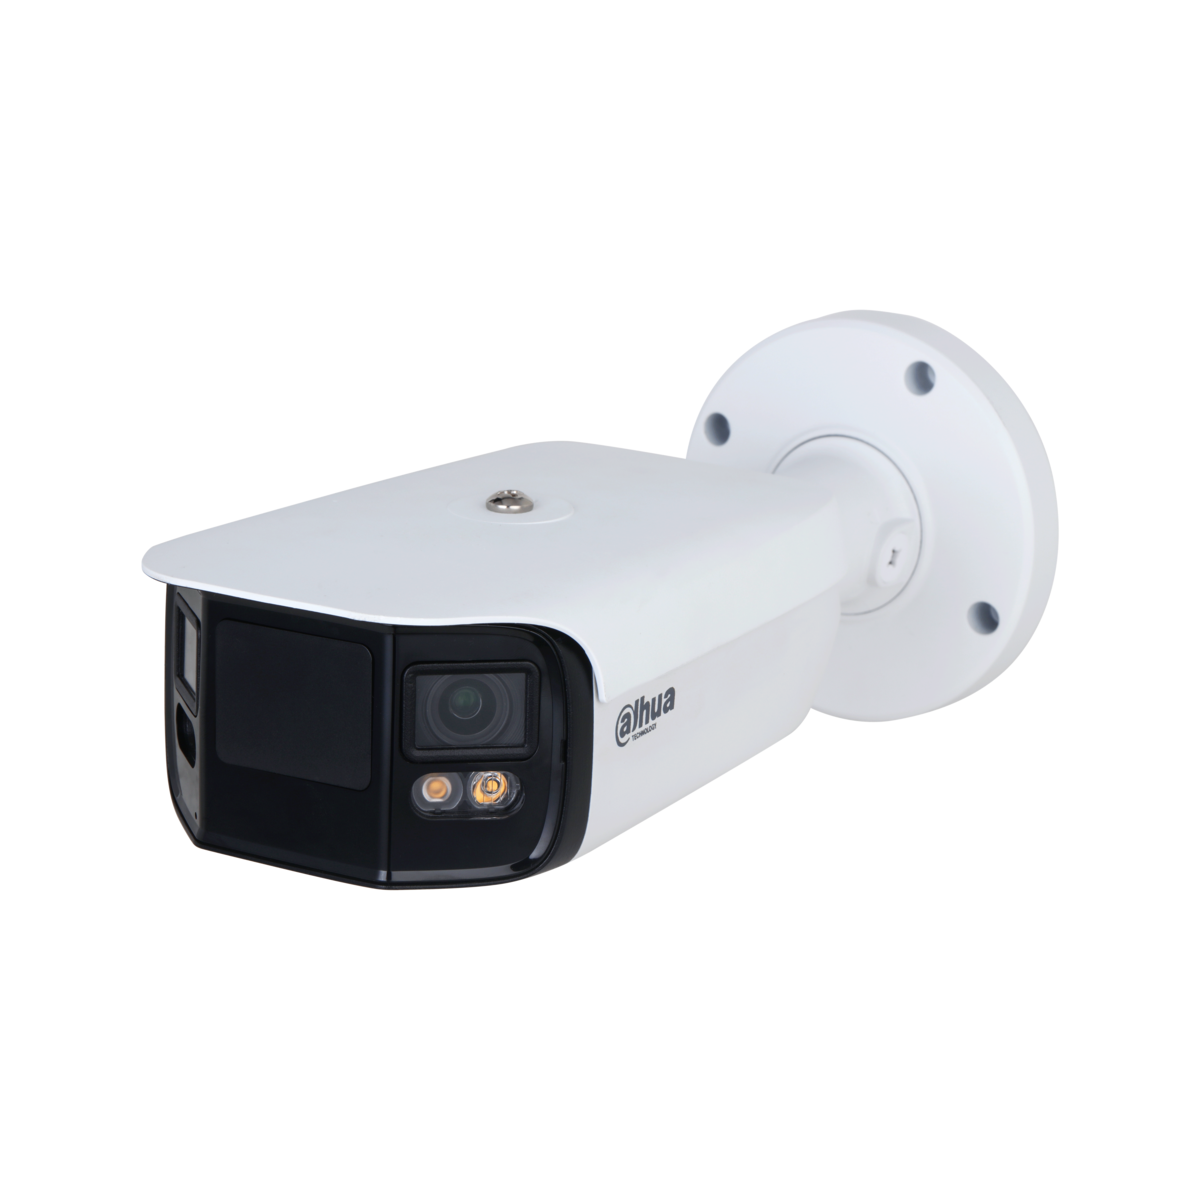 WIZMIND SERIES IP CAMERA WHITE AI 180° PEOPLE COUNT 2x4MP H.264/5 BULLET 140 TRUE WDR PLASTIC/METAL 3.6MMFIXED LENS STARLIGHT WARM LED 40M POE+ IP67 BUILT IN MIC AUDIO IN AUDIO OUT 1 x ALARM IN 1 x ALARM OUT SUPPORT UP TO 512GB SD 12VDC